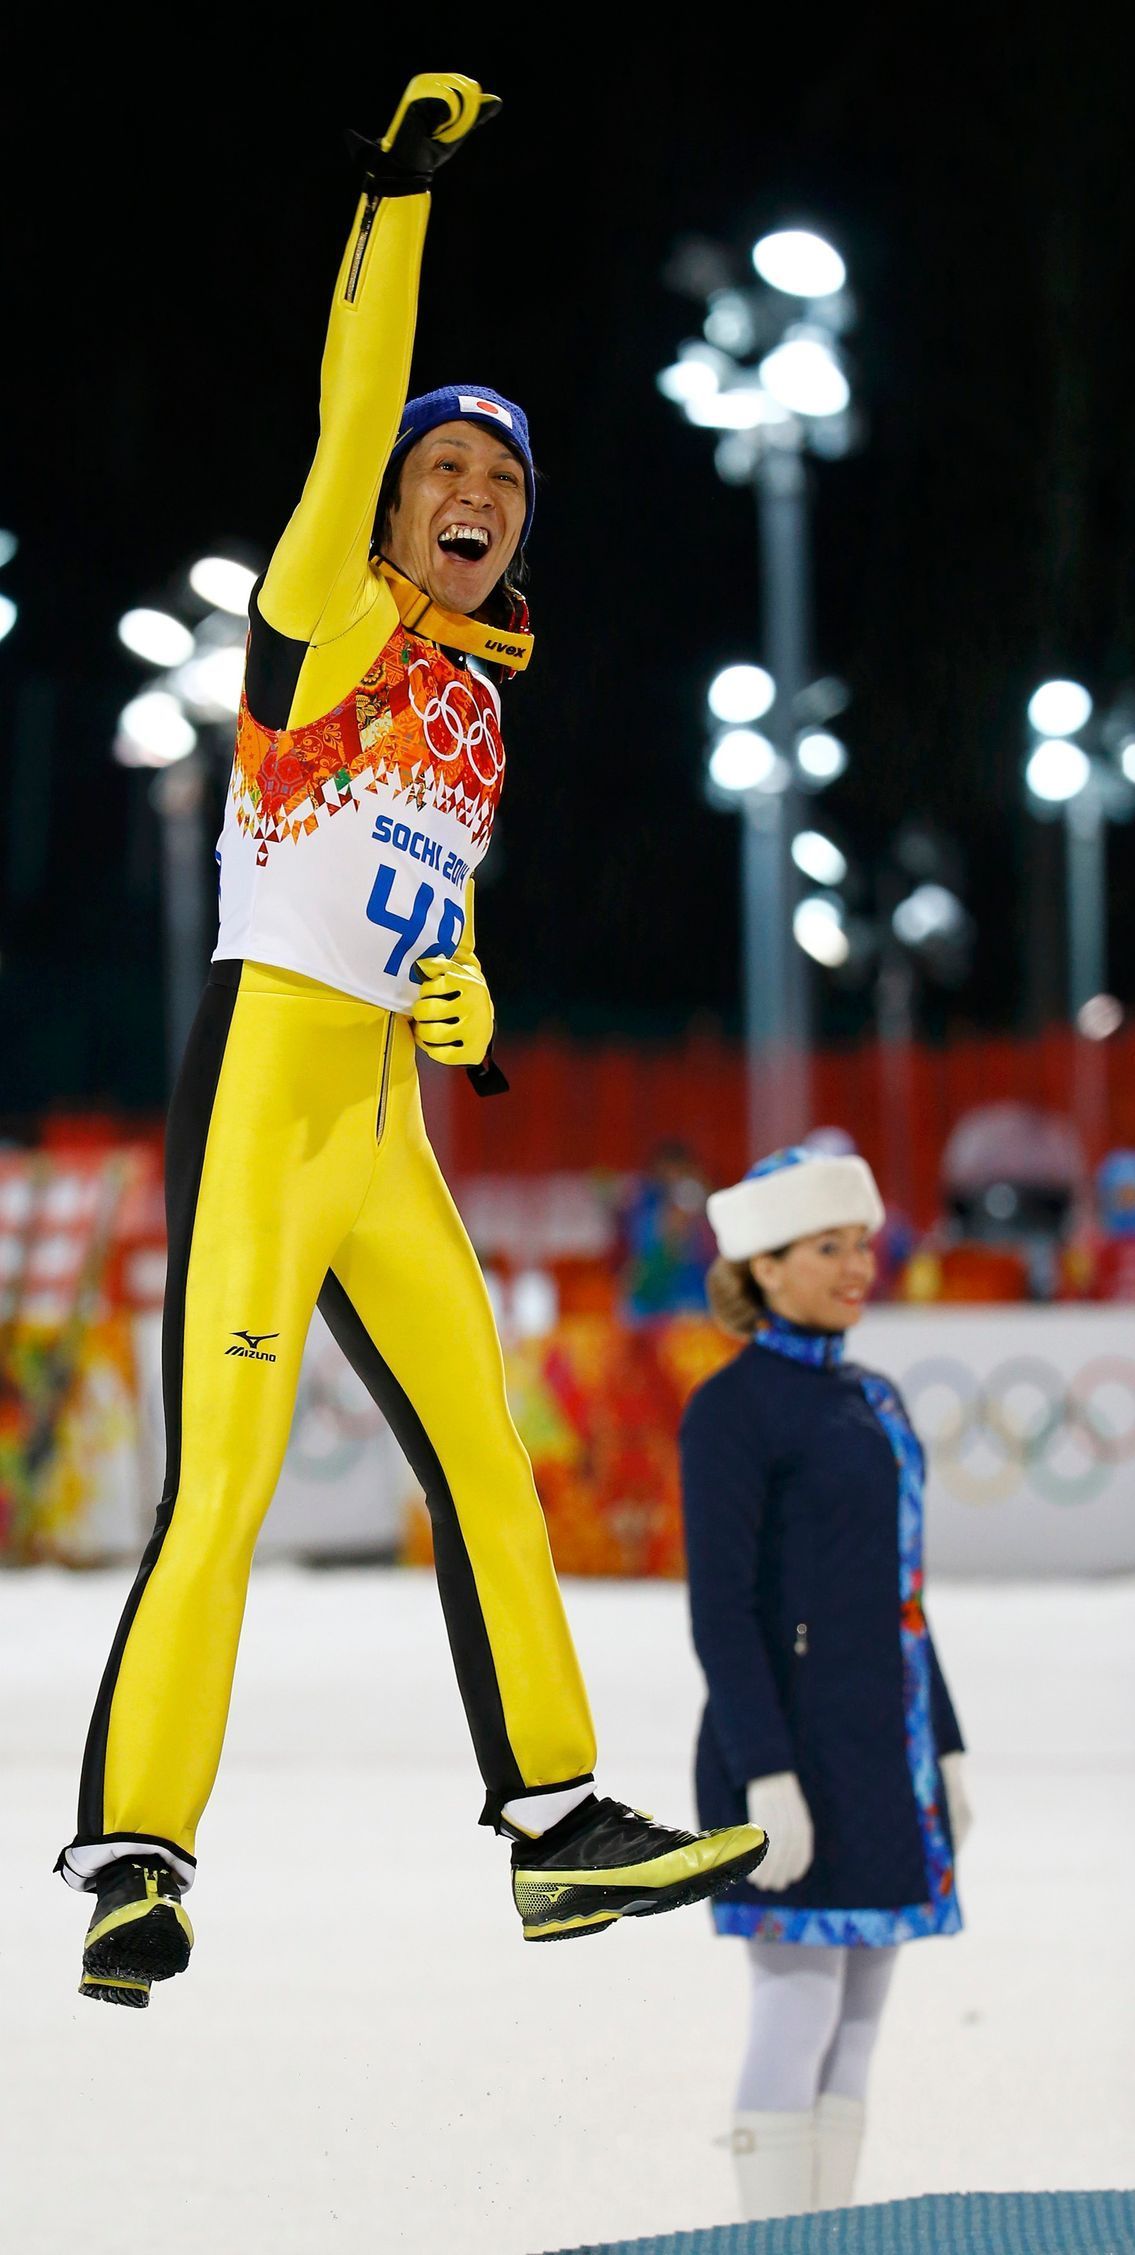 Second-placed Japan's Kasai celebrates during flower ceremony for men's ski jumping individual normal hill final event of Sochi 2014 Winter Olympic Games in Rosa Khutor